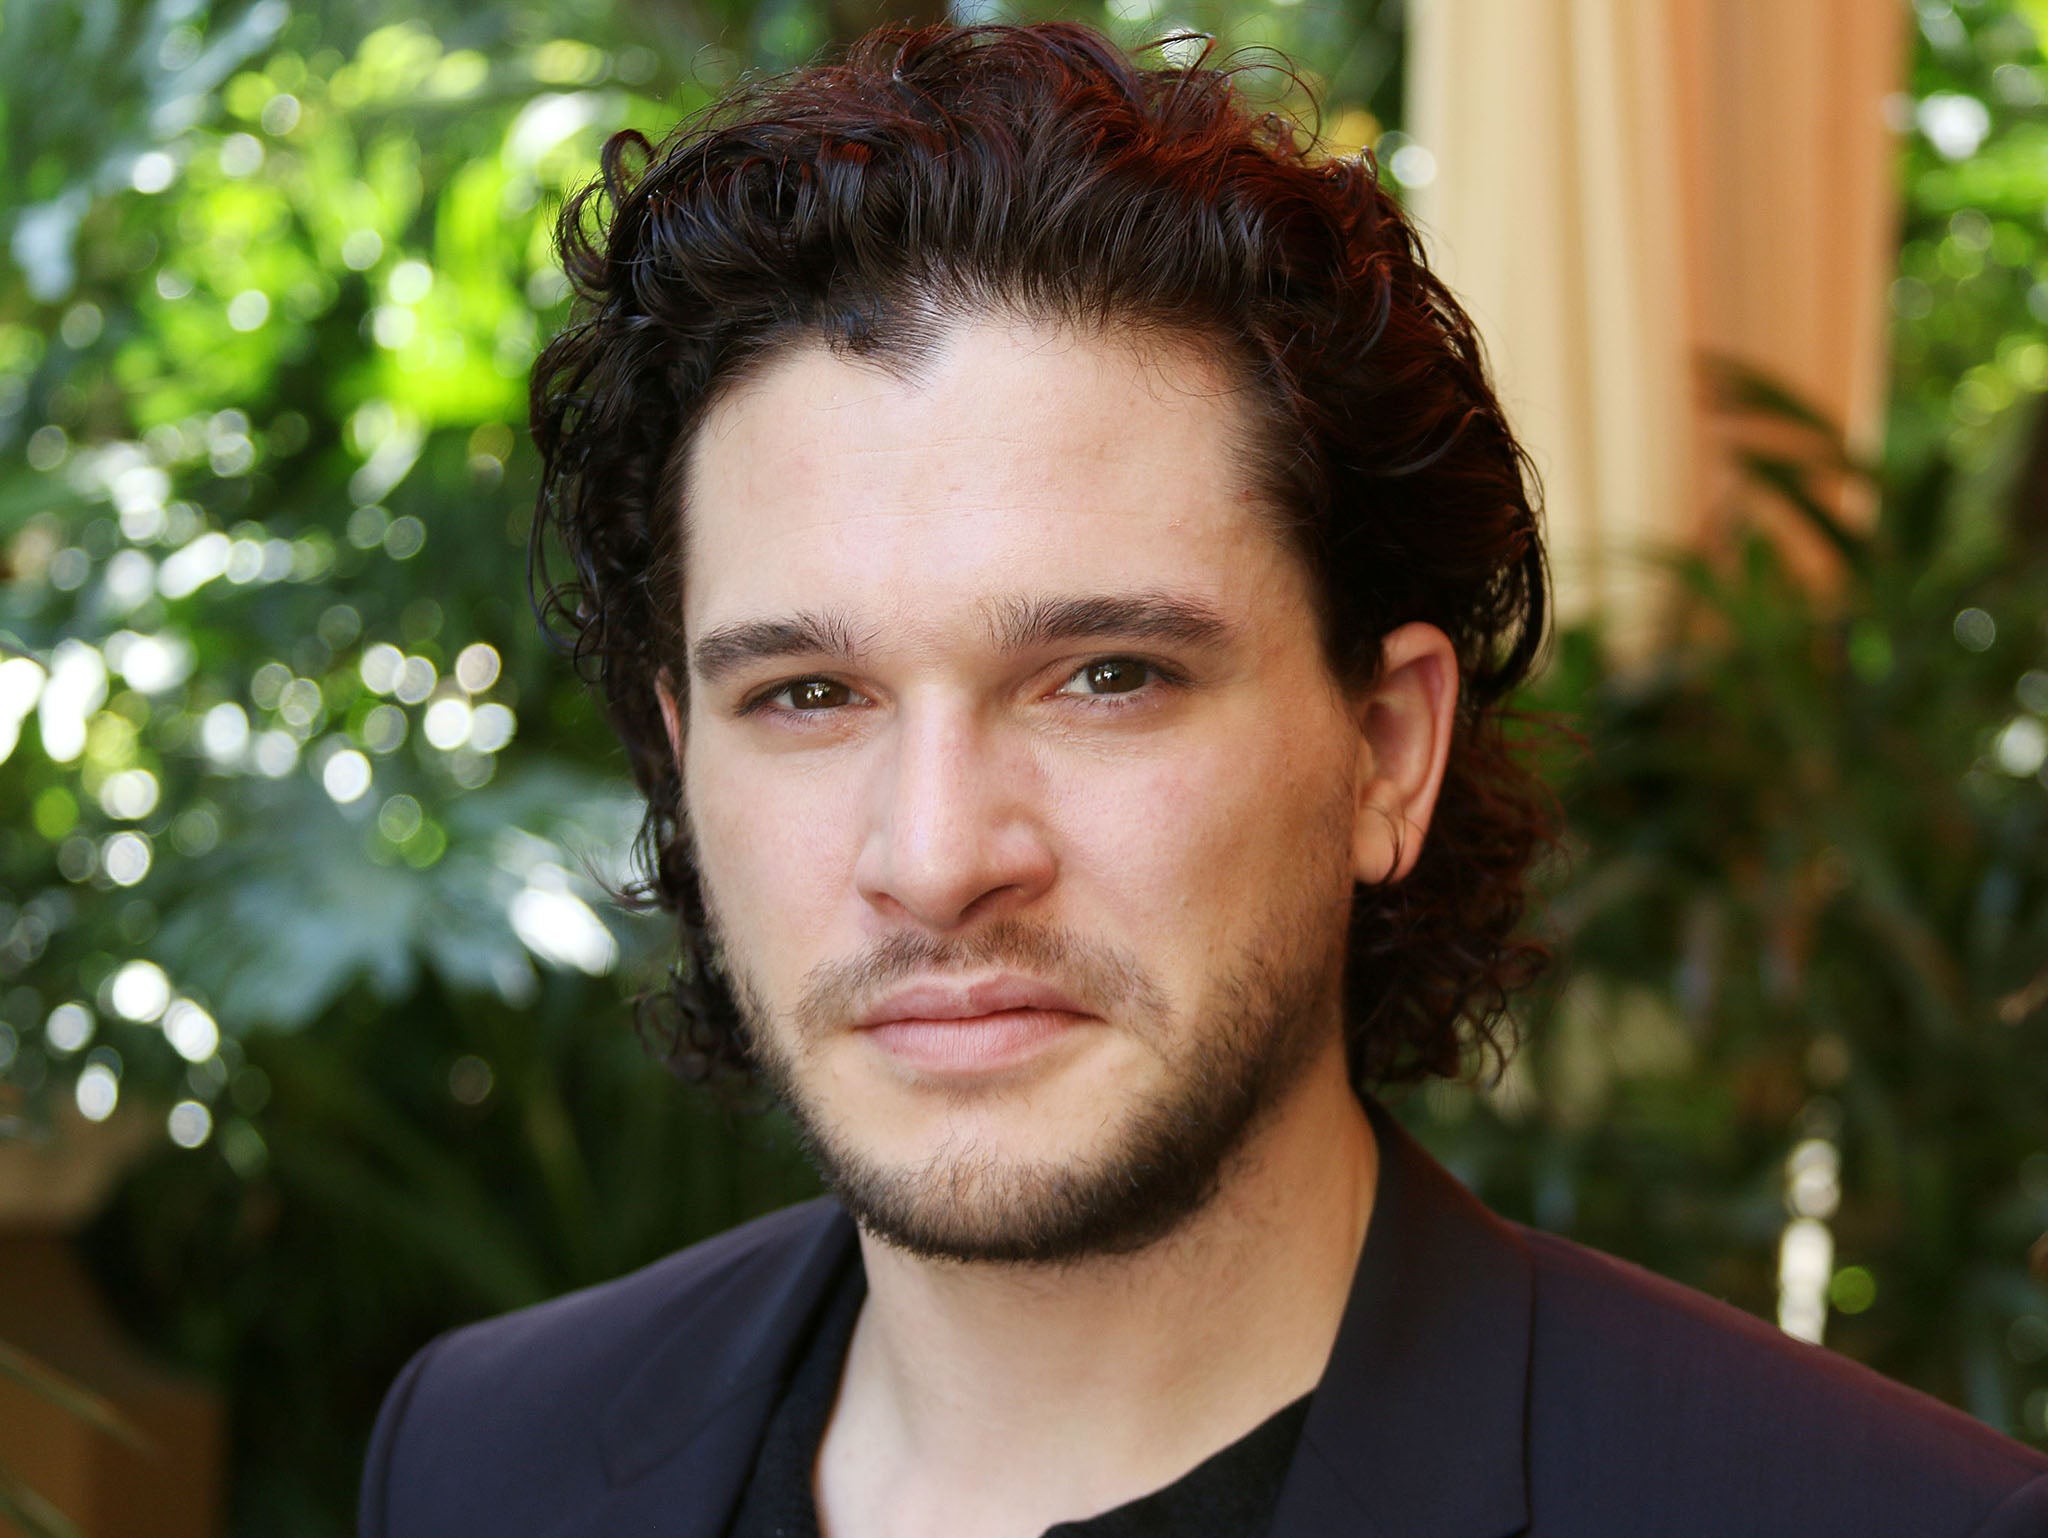 Kit Harington is best known for playing Jon Snow in Game of Thrones